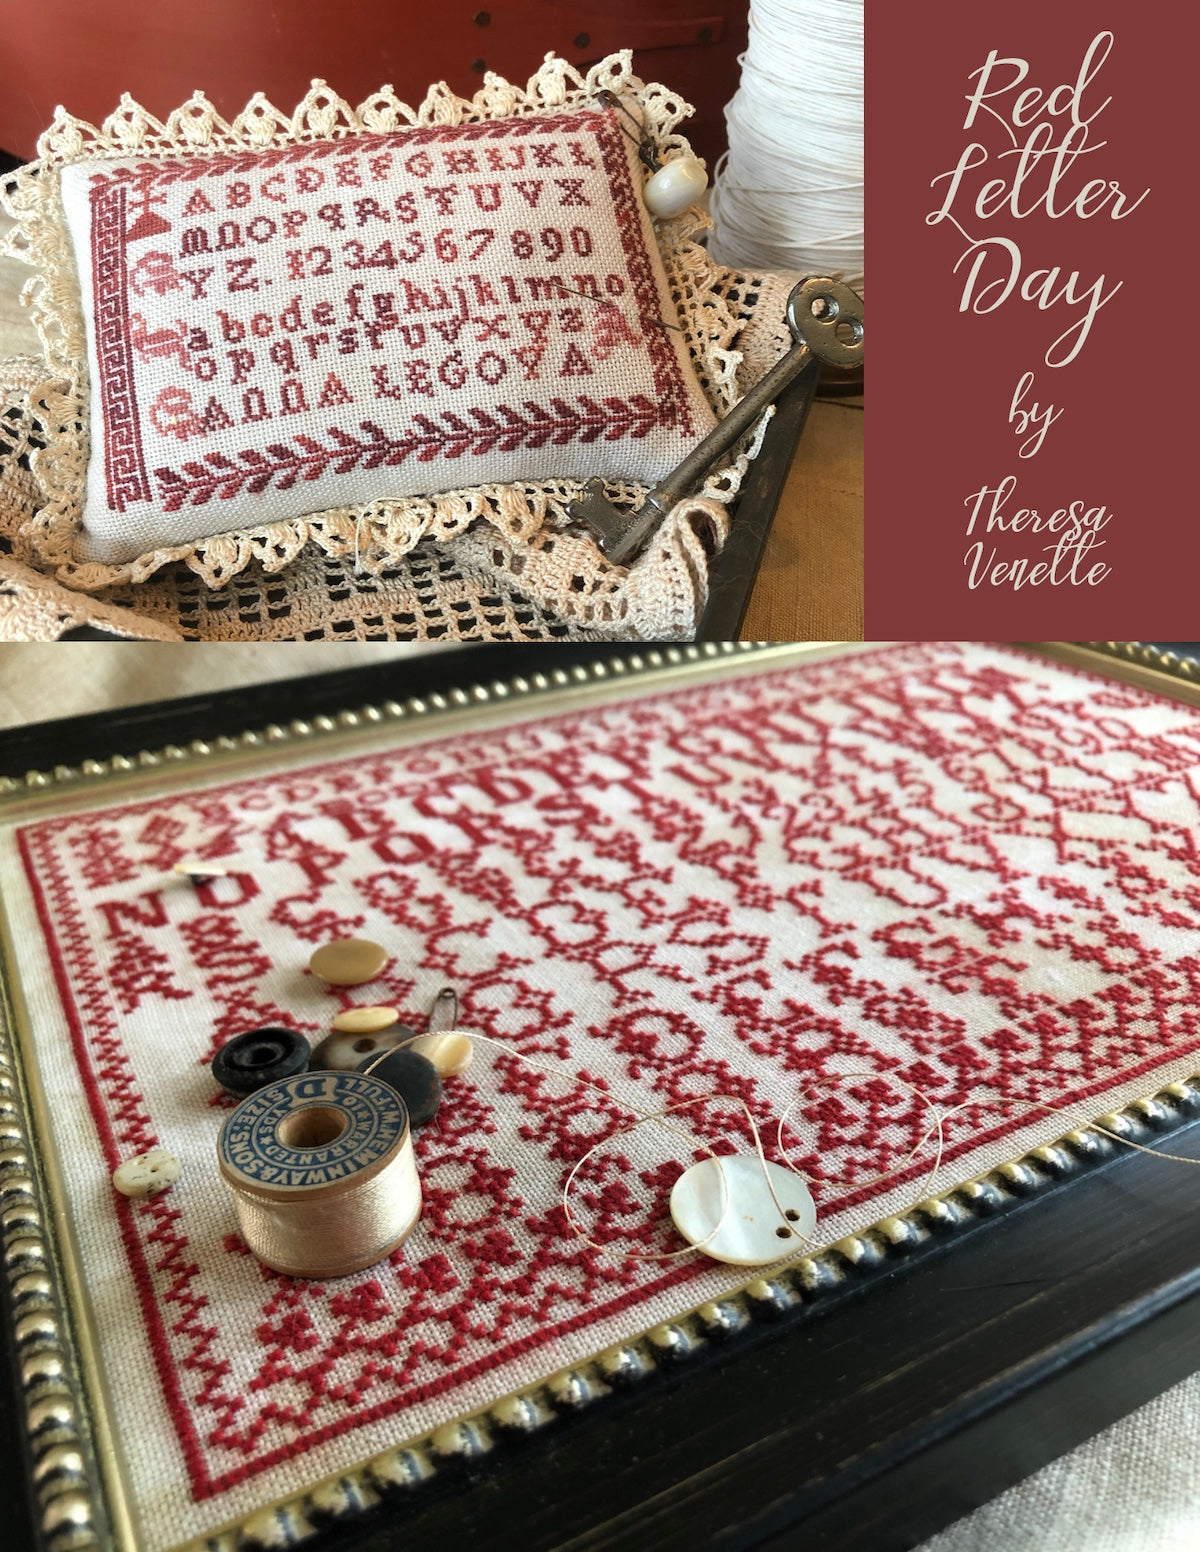 Red Letter Day - Cross Stitch Book by Shakespeare's Peddler